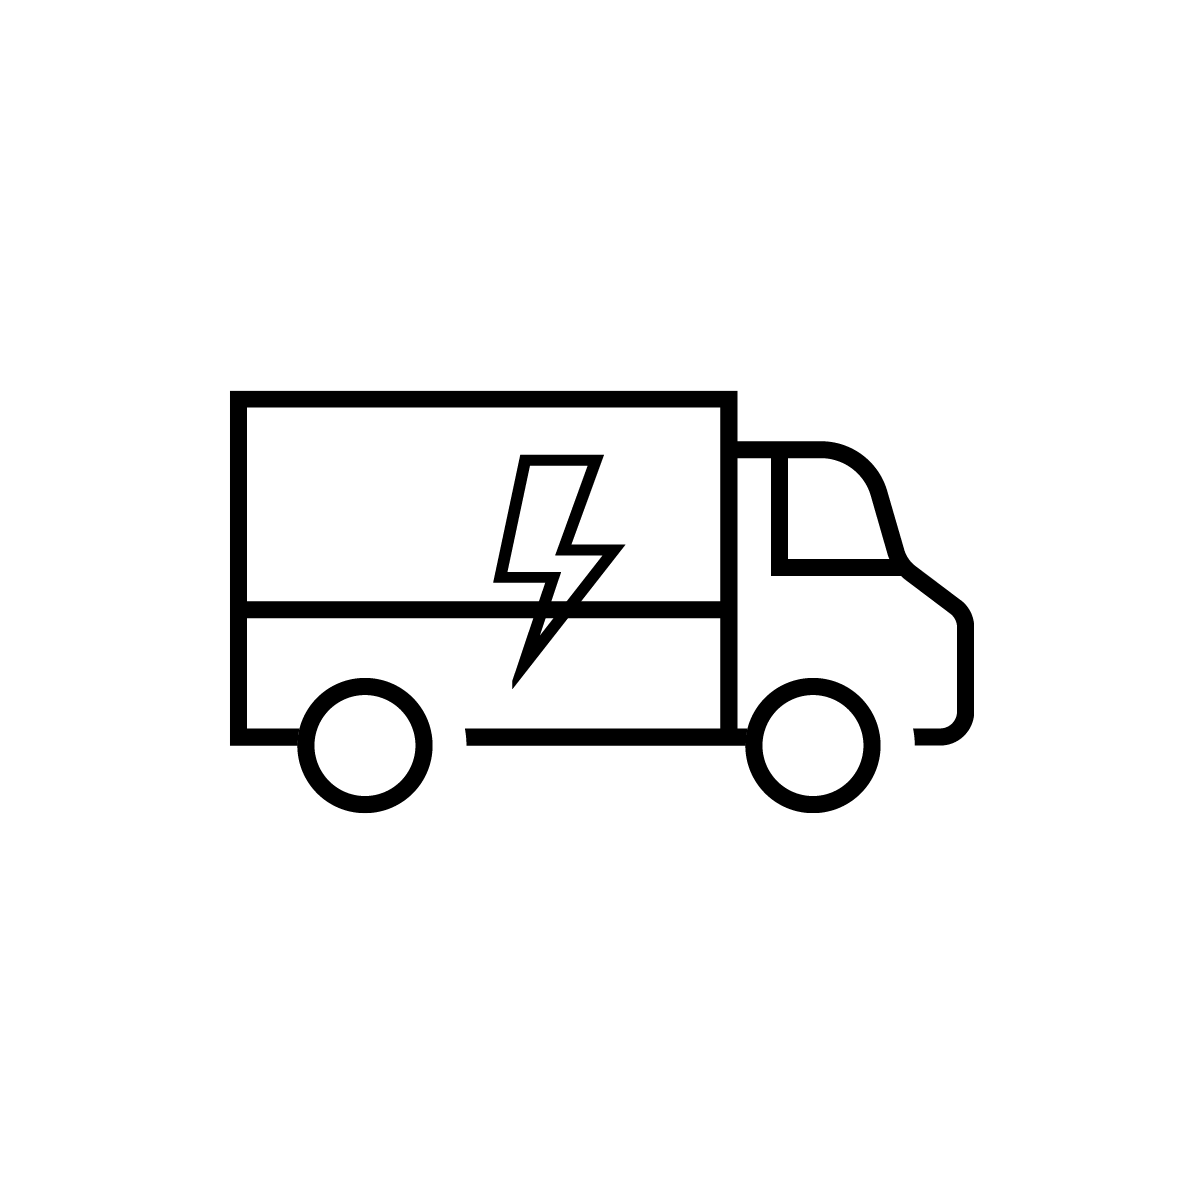 Pictogram of truck with flash